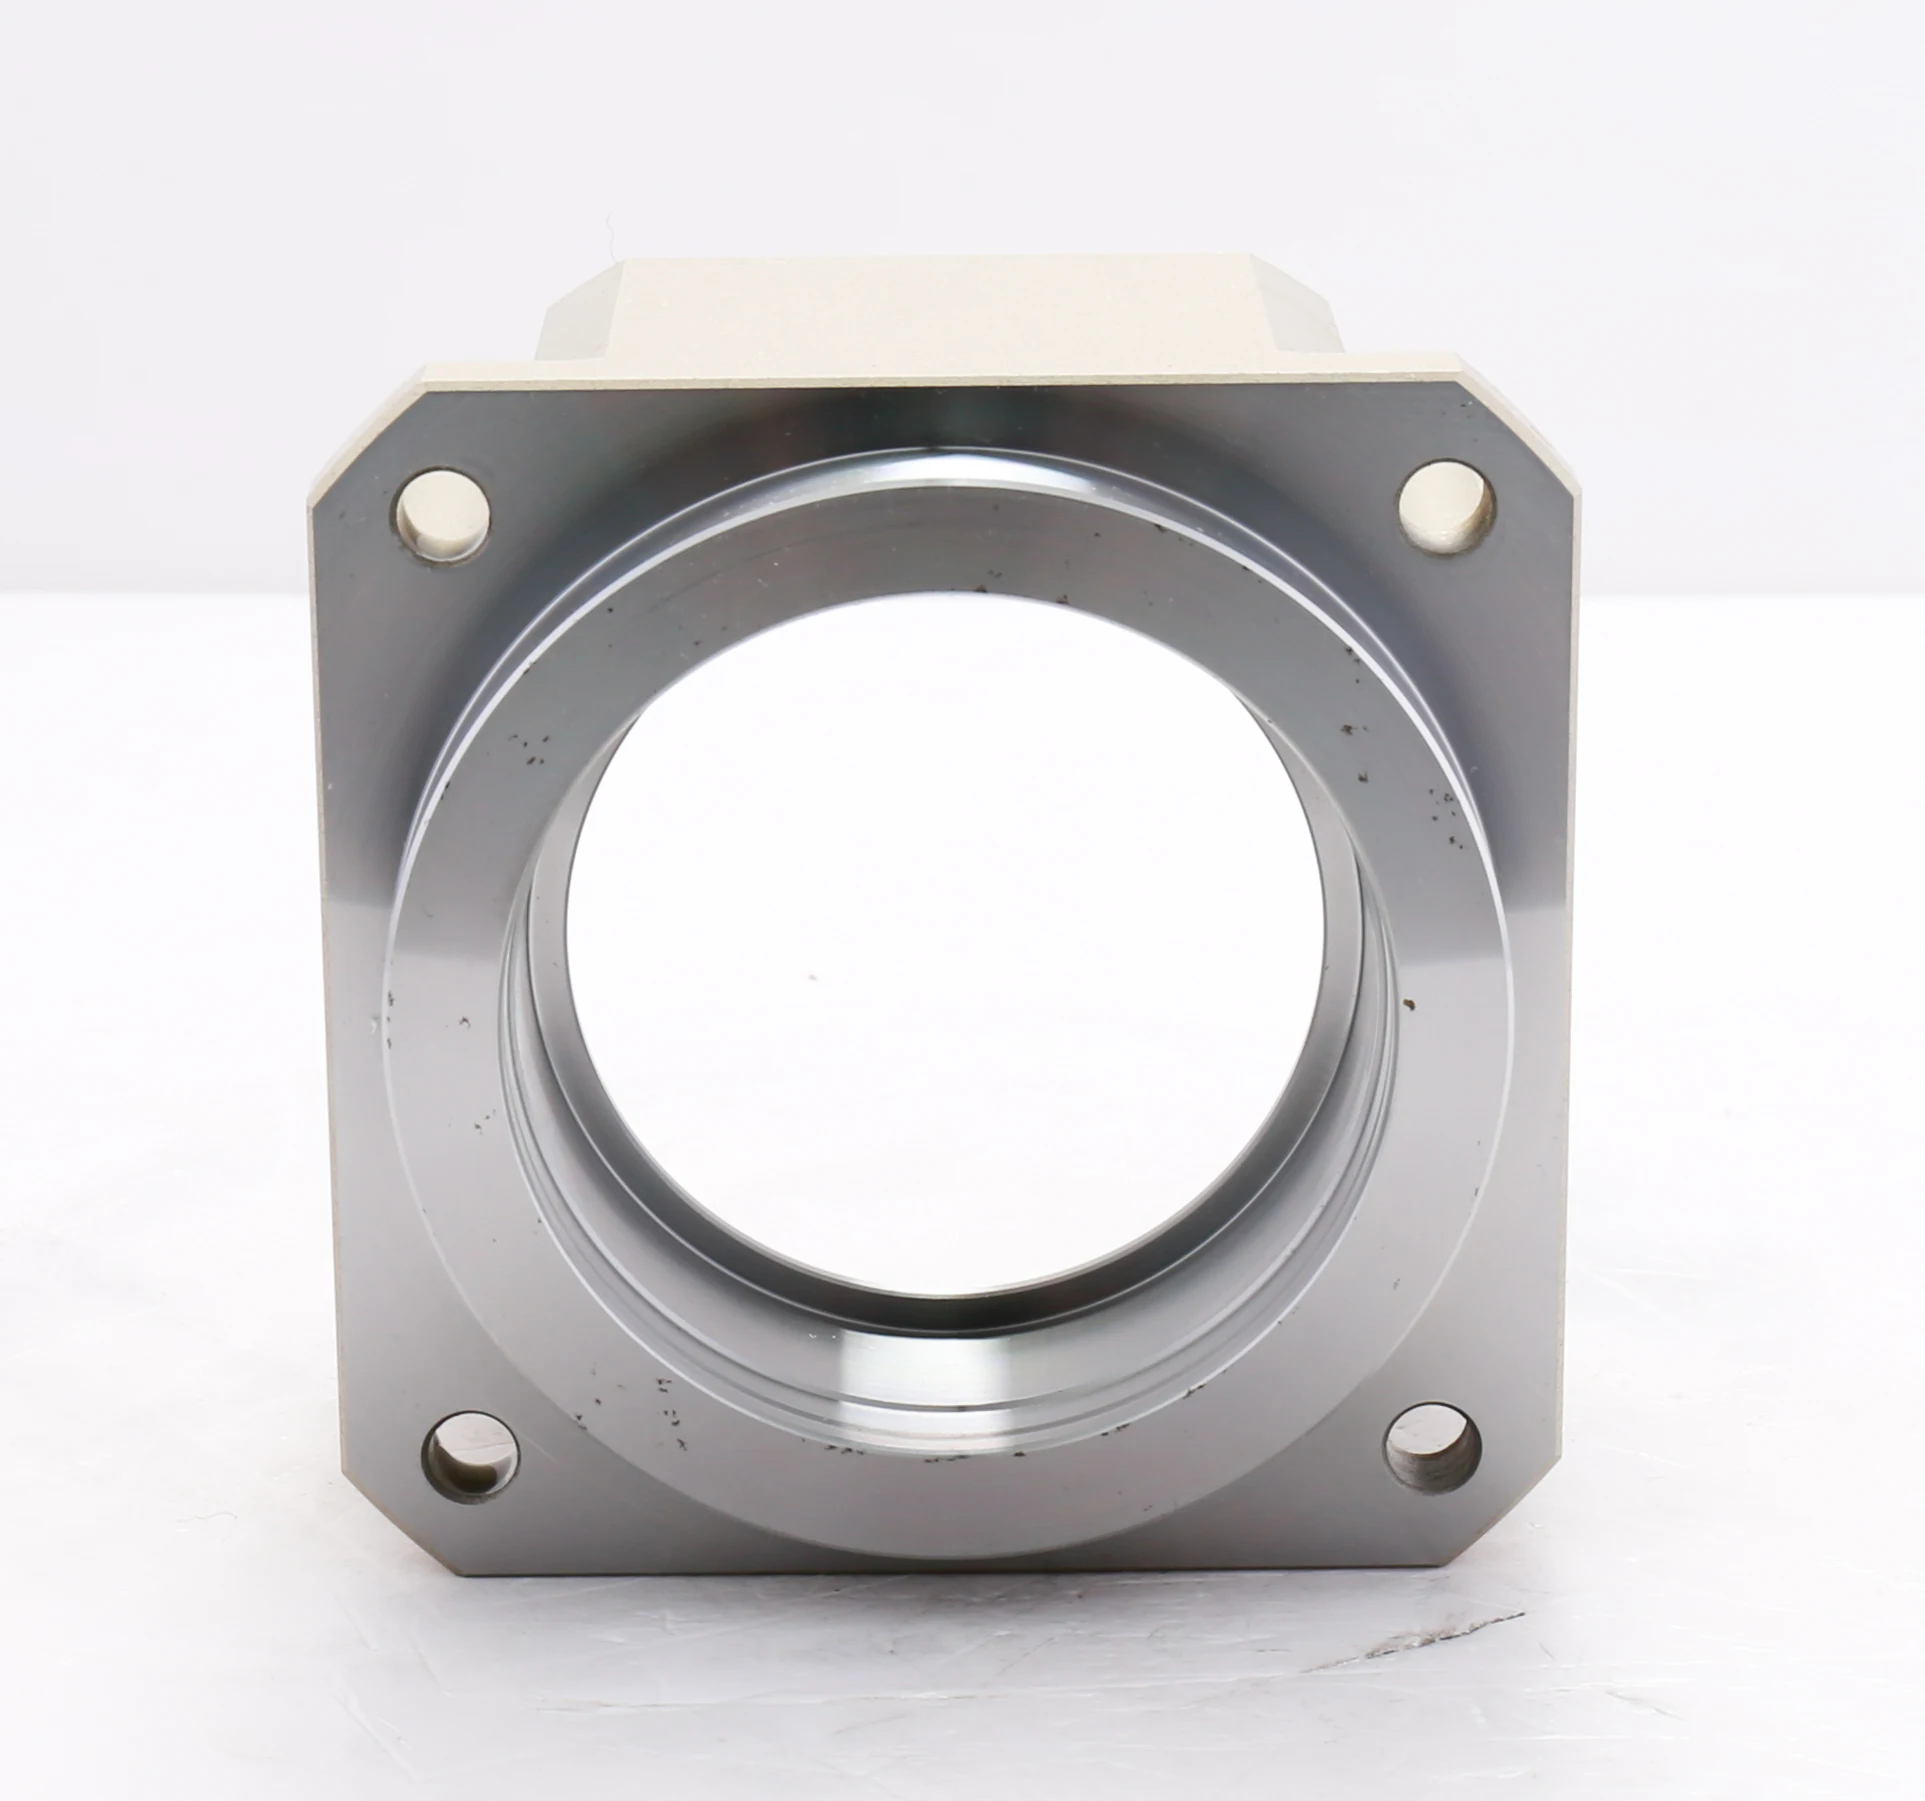 ZDWE Series 60mm Round Flange Right Angle Planetary Gearbox Reducer , One Stage Reduction Ratio 3:1-10:1 For Servo Motor